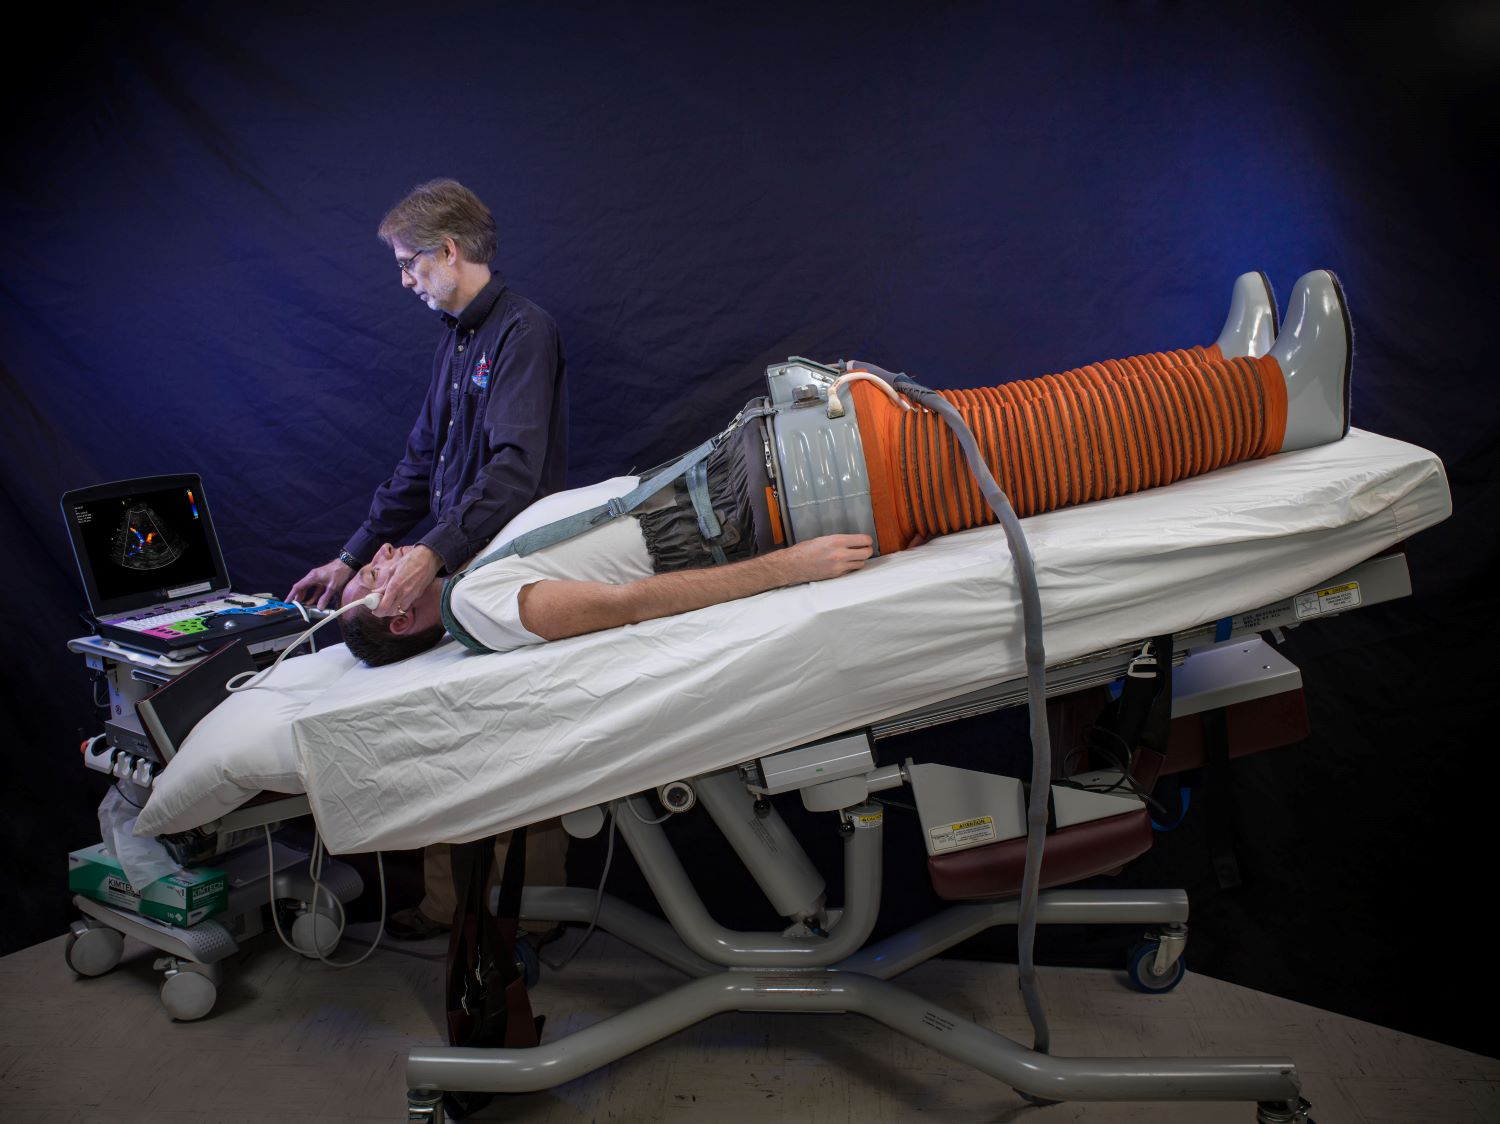 Using an ultrasound, NASA’s Human Research Program is currently testing noninvasive techniques to evaluate and measure intracranial pressure as part of the One-Year Mission research. NASA is collaborating with the Russians to test a potential countermeasure using a Russian Lower Body Negative Pressure (LBNP) or Chibis suit which could help shift fluids from the upper body to the lower body in crews before returning to Earth.